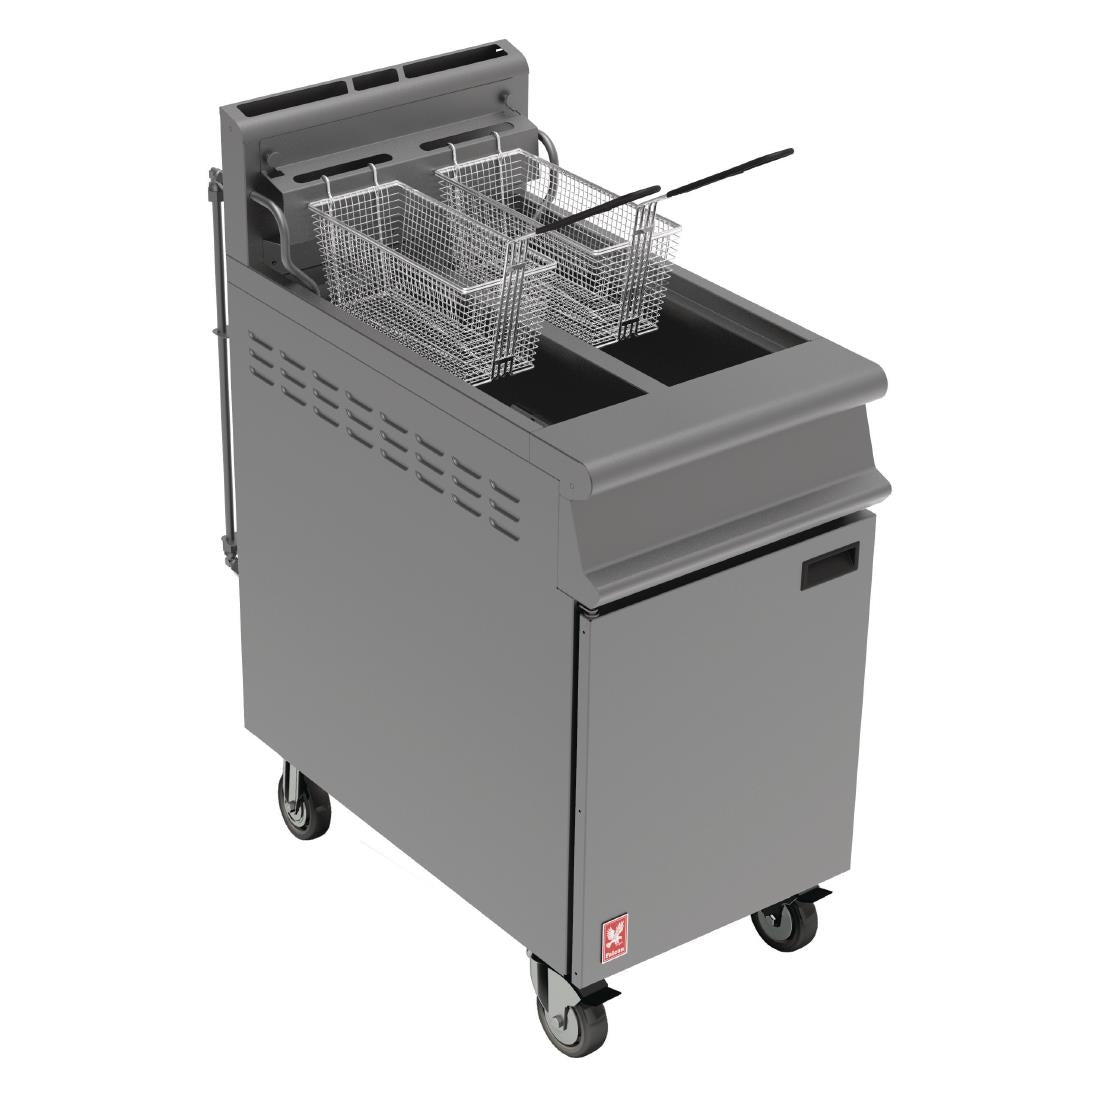 Falcon Free Standing Natural Gas Filtration Fryer with Castors G3845F